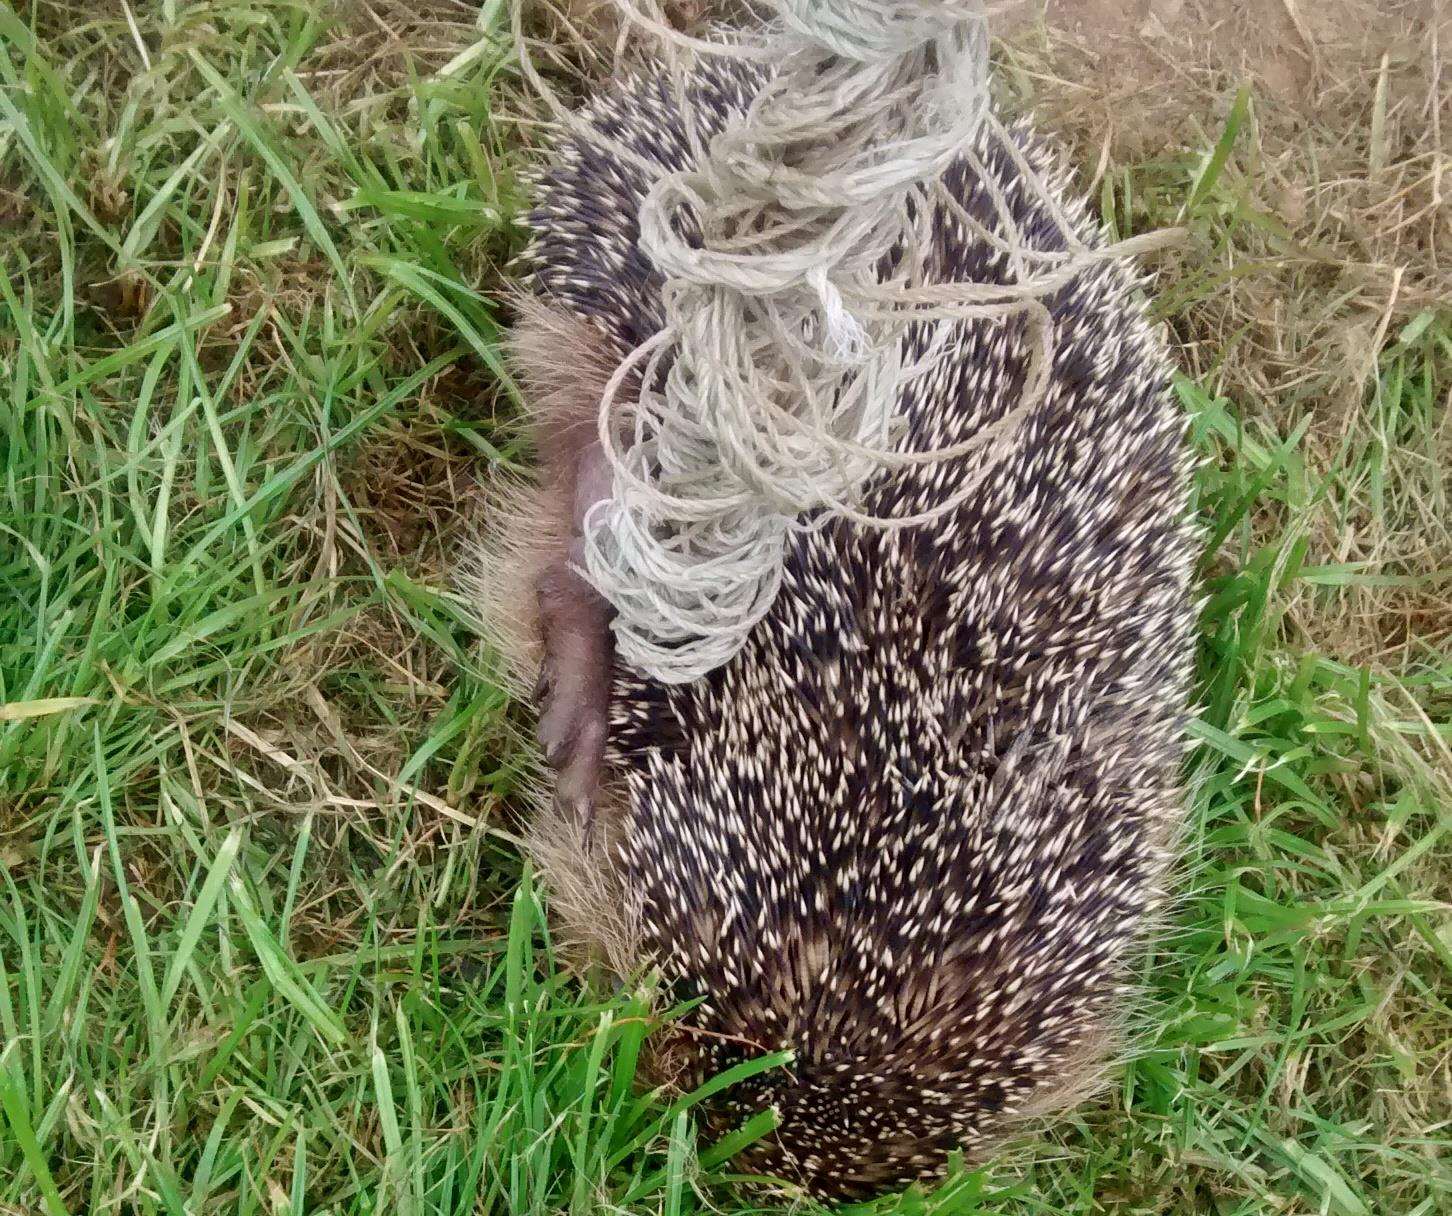 A hedgehog had to be saved after it got itself tangled in sports netting. (1950437)